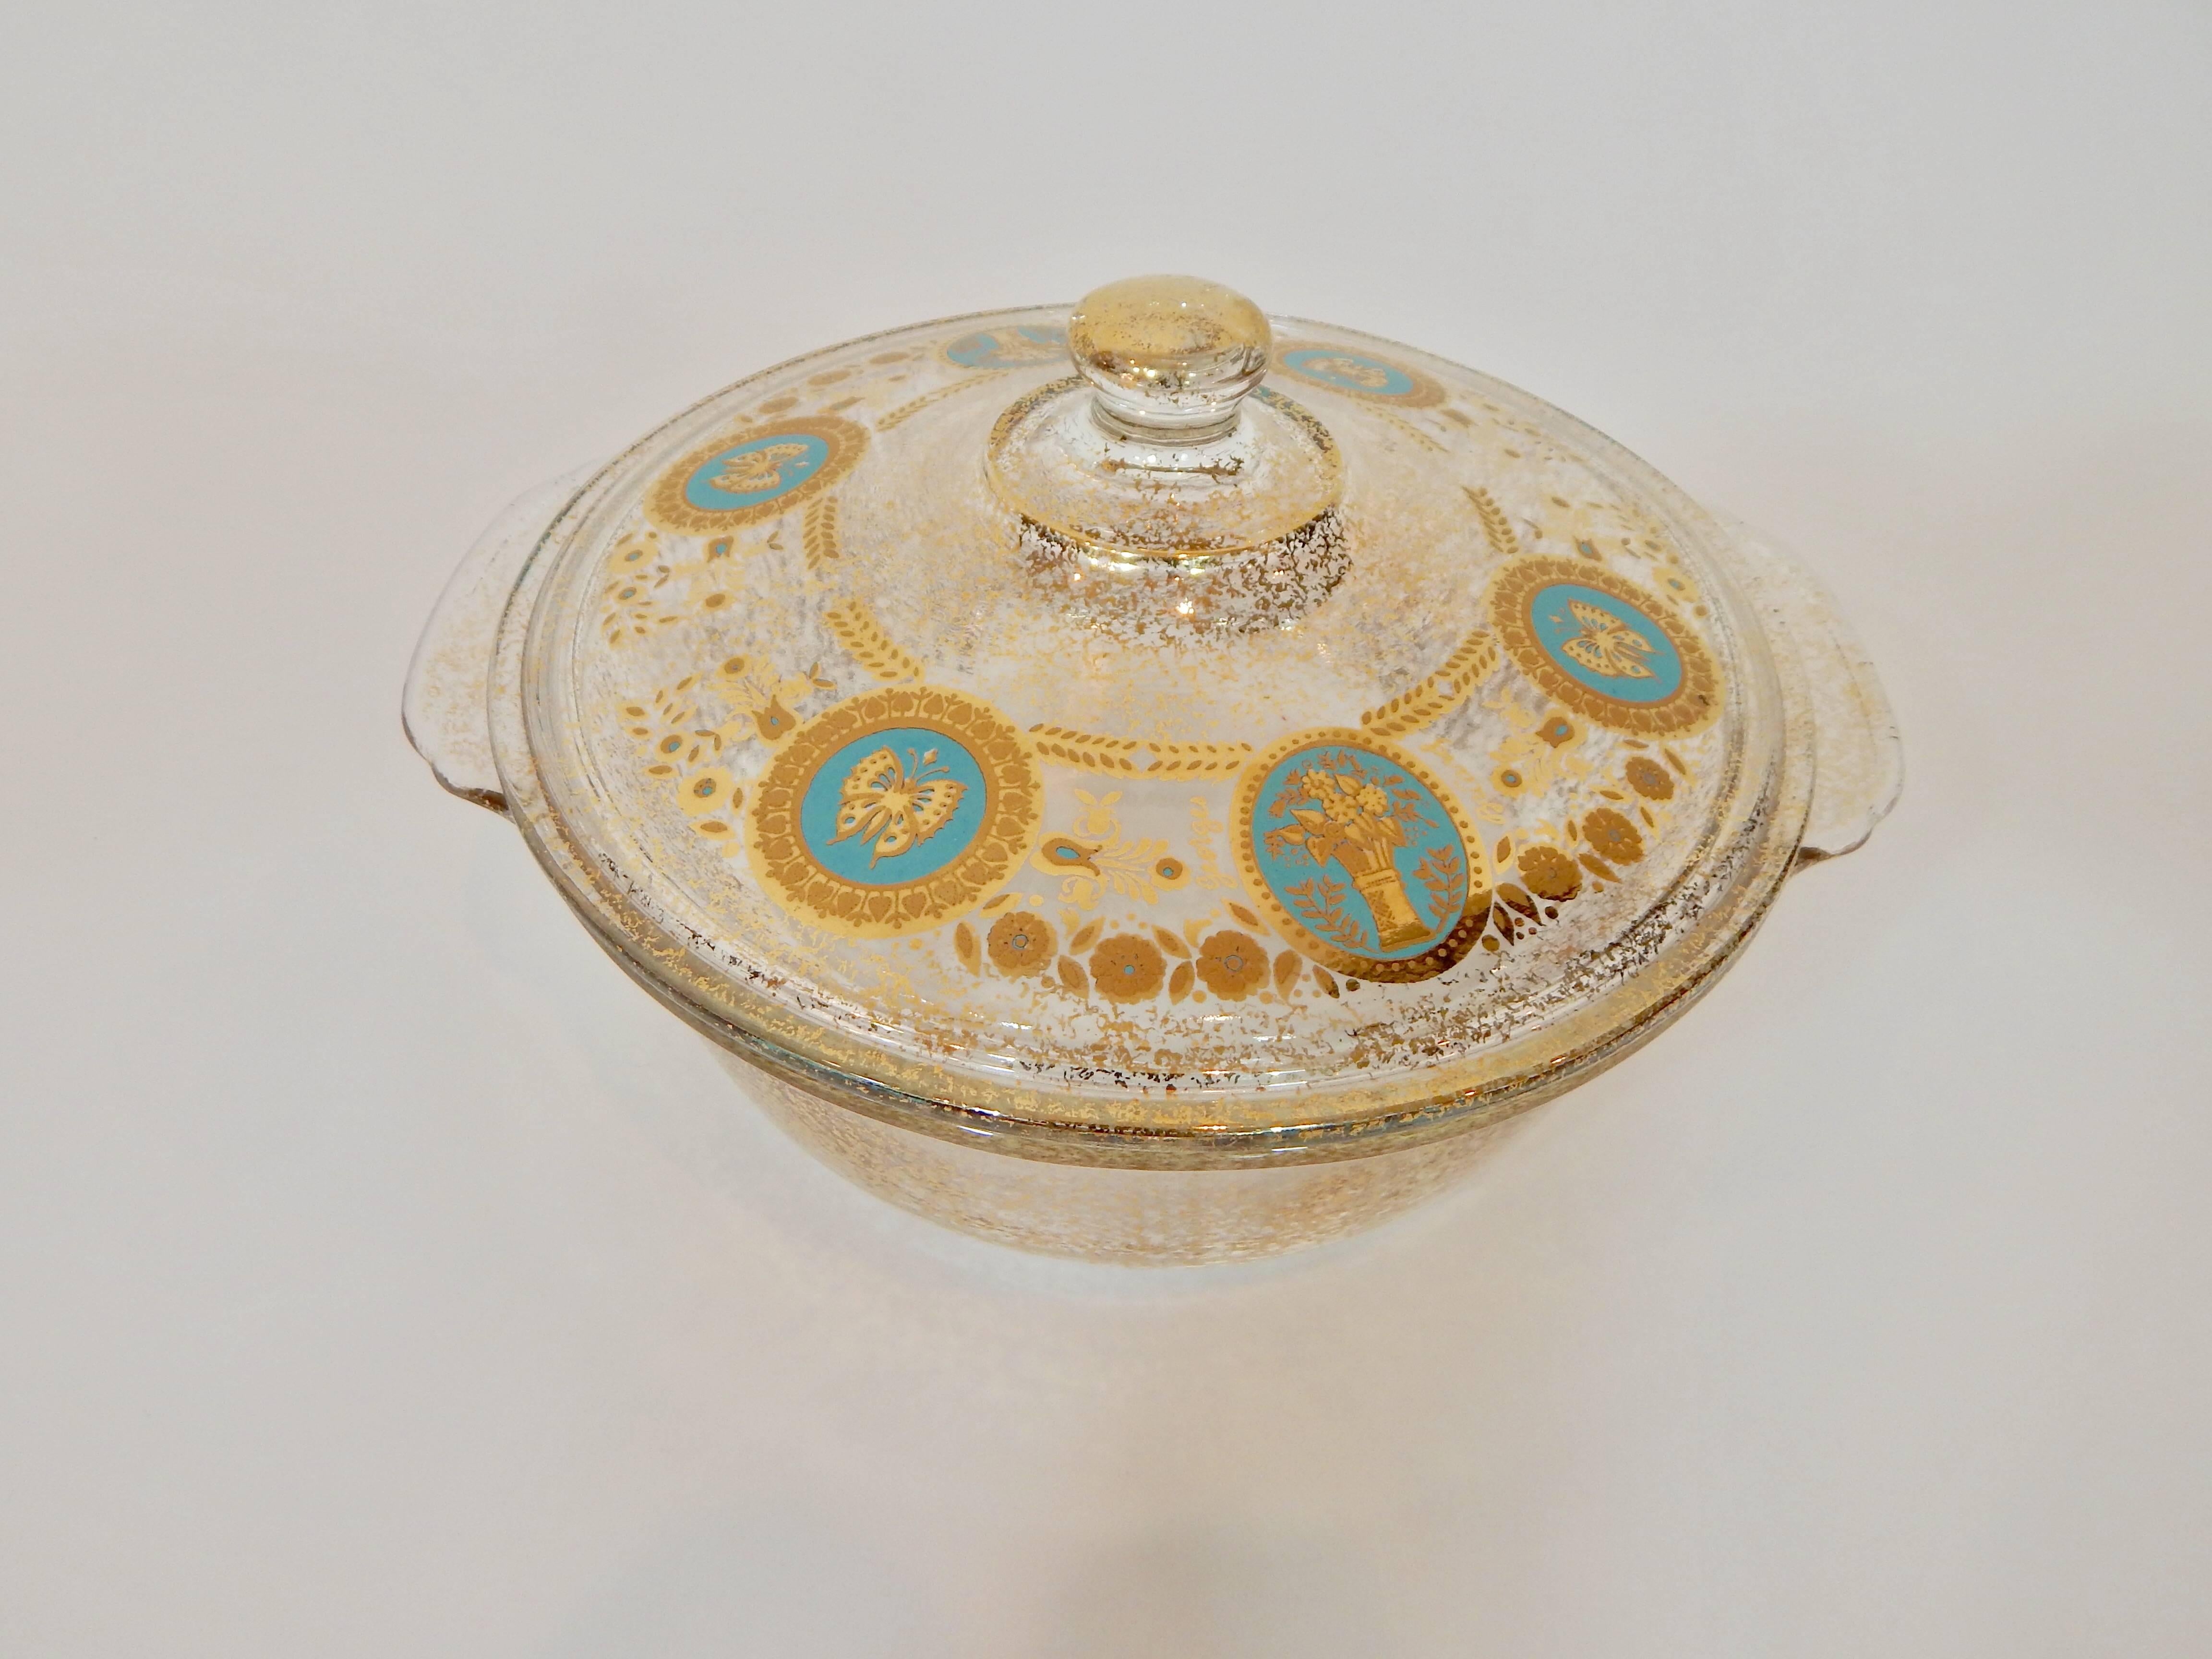 1950s signed Georges Briard gilded gold covered casserole serving dish or bowl. Turquoise blue accents. Excellent condition.